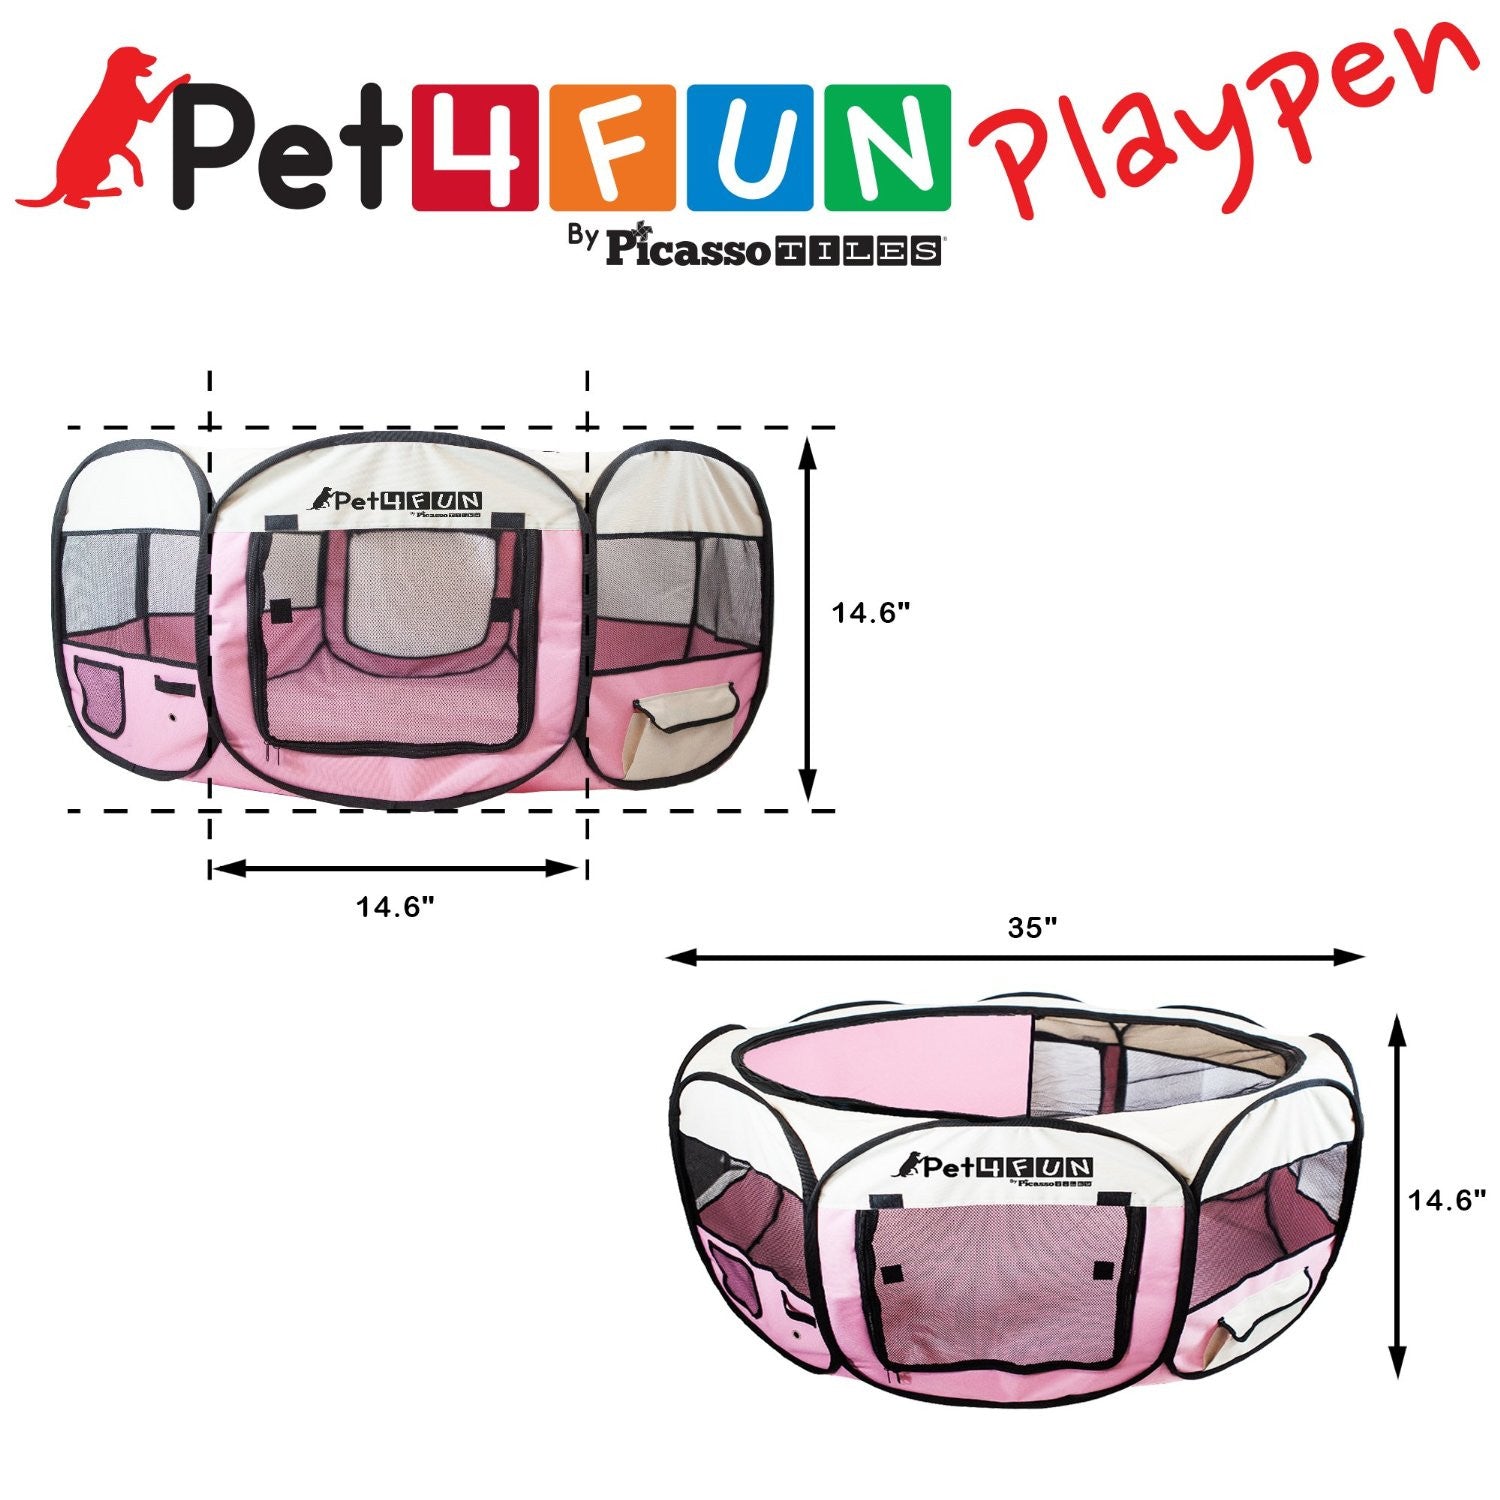 PET4FUN® PN935 35" Portable Pet Puppy Dog Cat Animal Playpen Yard Crates Kennel w/ Premium 600D Oxford Cloth, Tool-Free Setup, Carry Bag, Removable Security Mesh Cover/Shade, 2 Storage Pockets